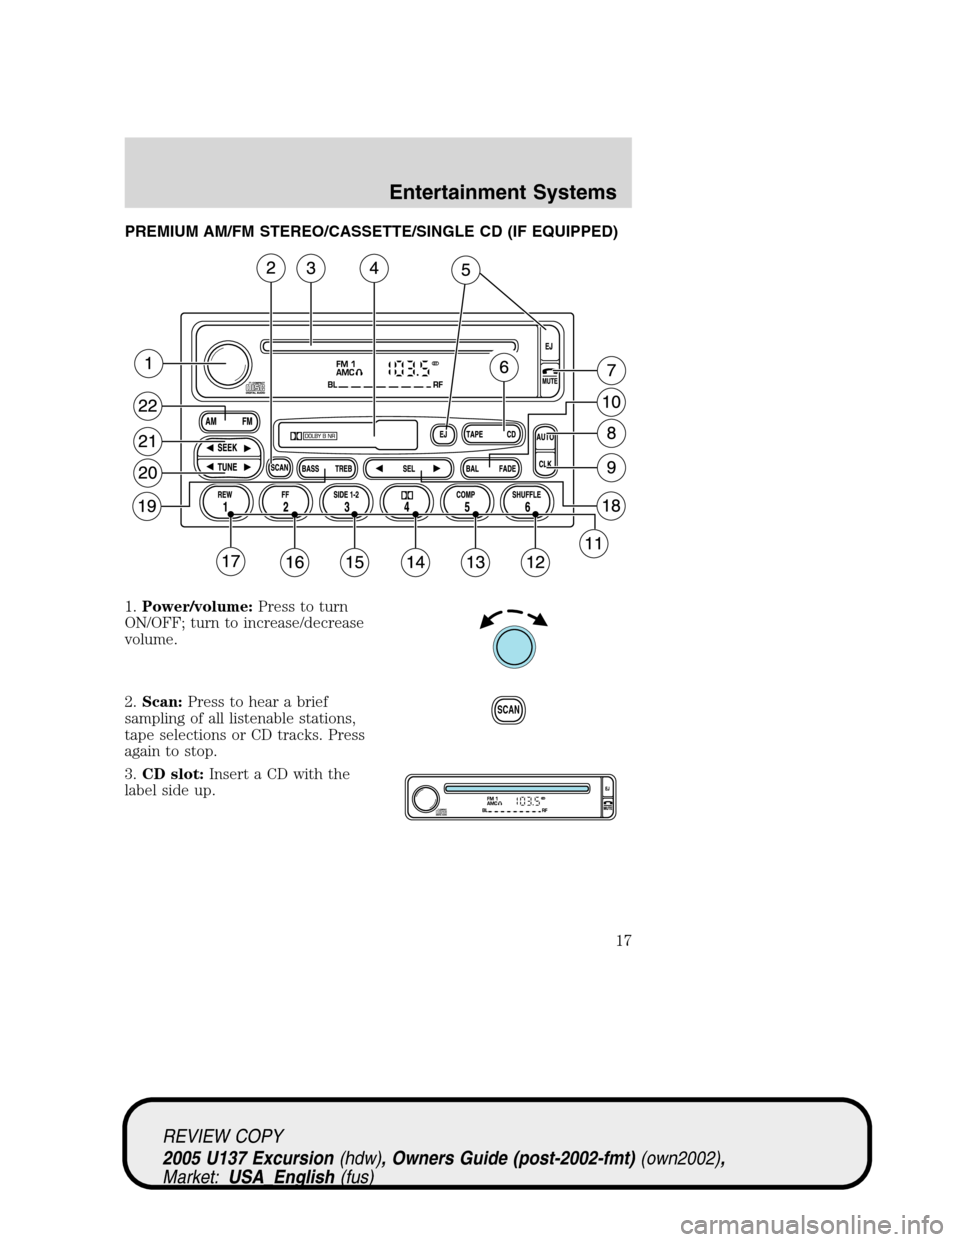 FORD EXCURSION 2005 1.G User Guide PREMIUM AM/FM STEREO/CASSETTE/SINGLE CD (IF EQUIPPED)
1.Power/volume:Press to turn
ON/OFF; turn to increase/decrease
volume.
2.Scan:Press to hear a brief
sampling of all listenable stations,
tape sele